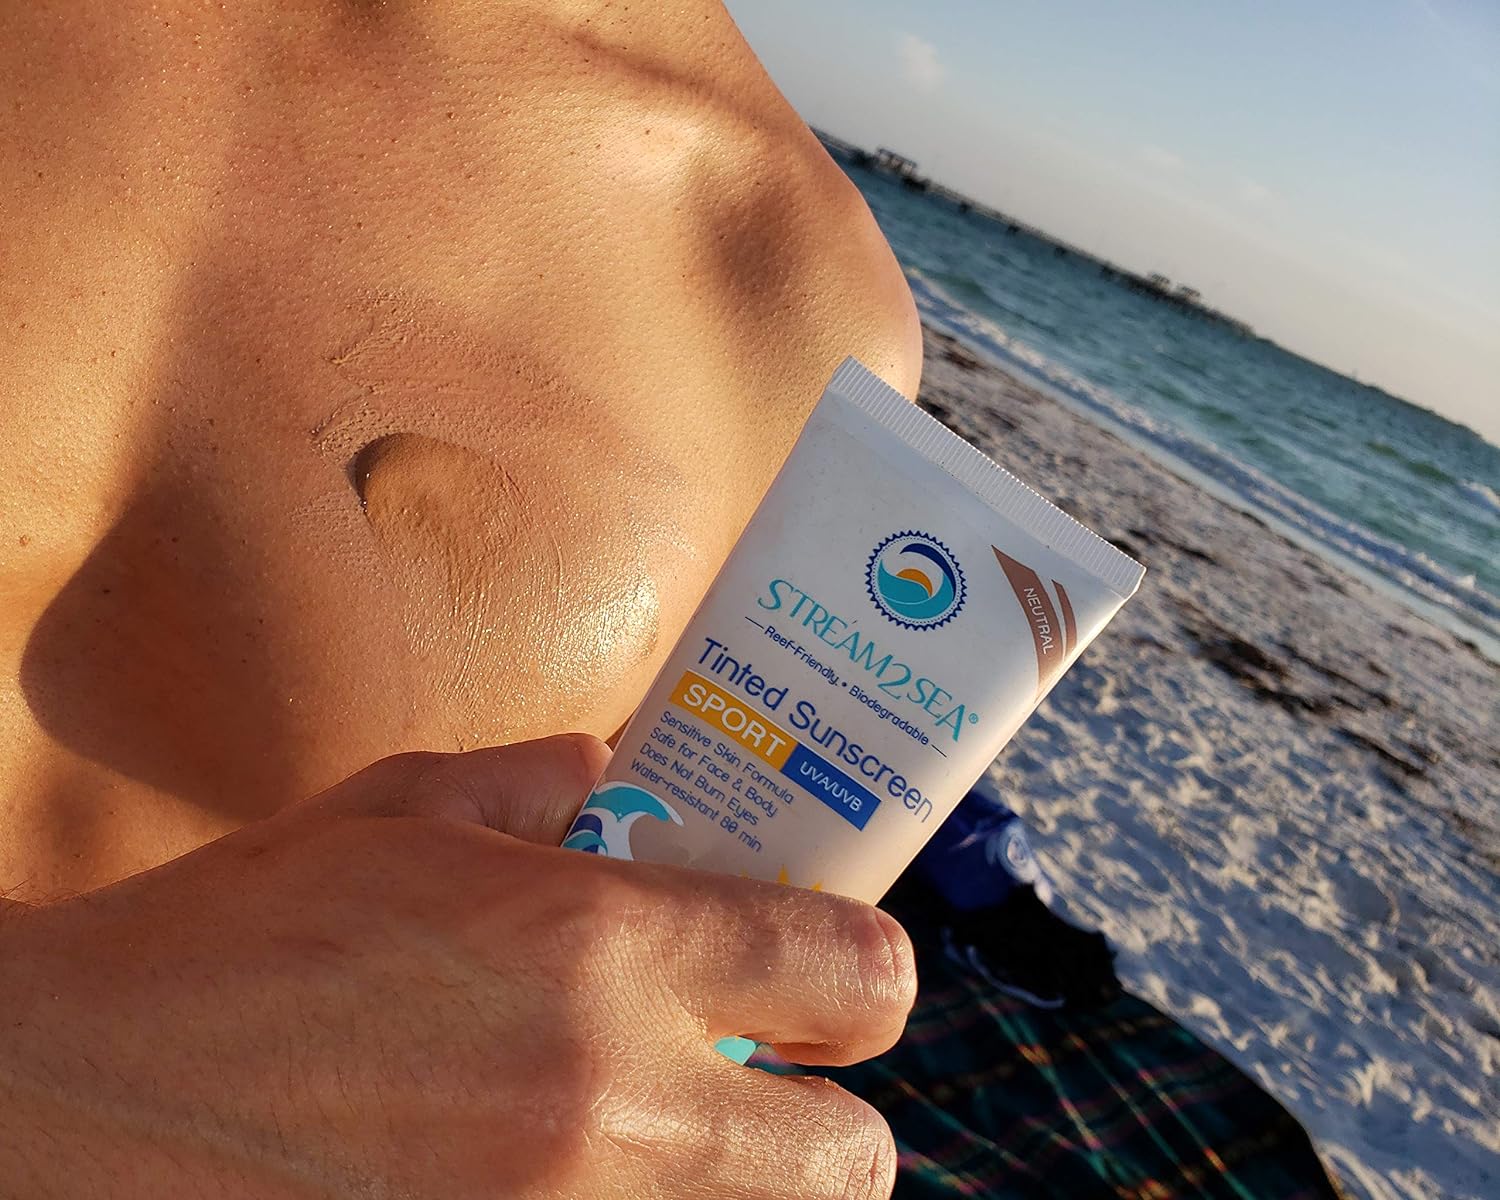 STREAM 2 SEA Tinted Sunscreen with SPF 30 All Natural, Biodegradable and Reef Safe| 3 Fl oz Non Greasy and Moisturizing Mineral Sunscreen For Face and Body Protection Against UVA and UVB : Beauty & Personal Care